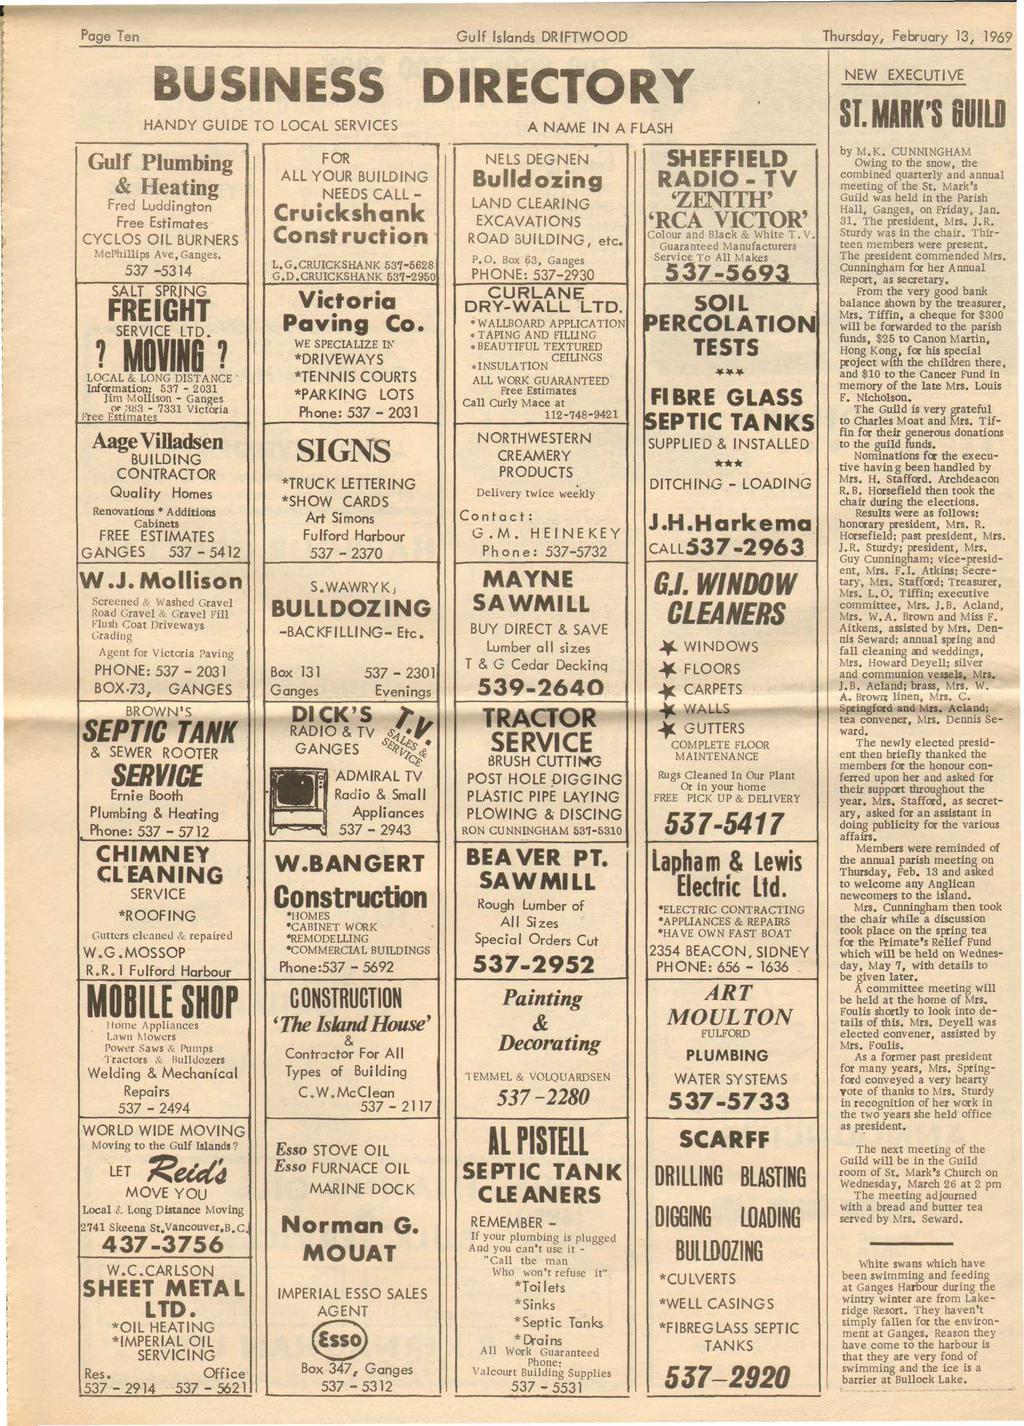 Page Ten Gulf Islands DRIFTWOOD Thursday, February 13, 1969 BUSINESS DIRECTORY HANDY GUIDE TO LOCAL S Gulf Plumbing & Heating Fred Luddingron Free Estimates CYCLOS OIL BURNERS McPhillips Ave,Ganges.